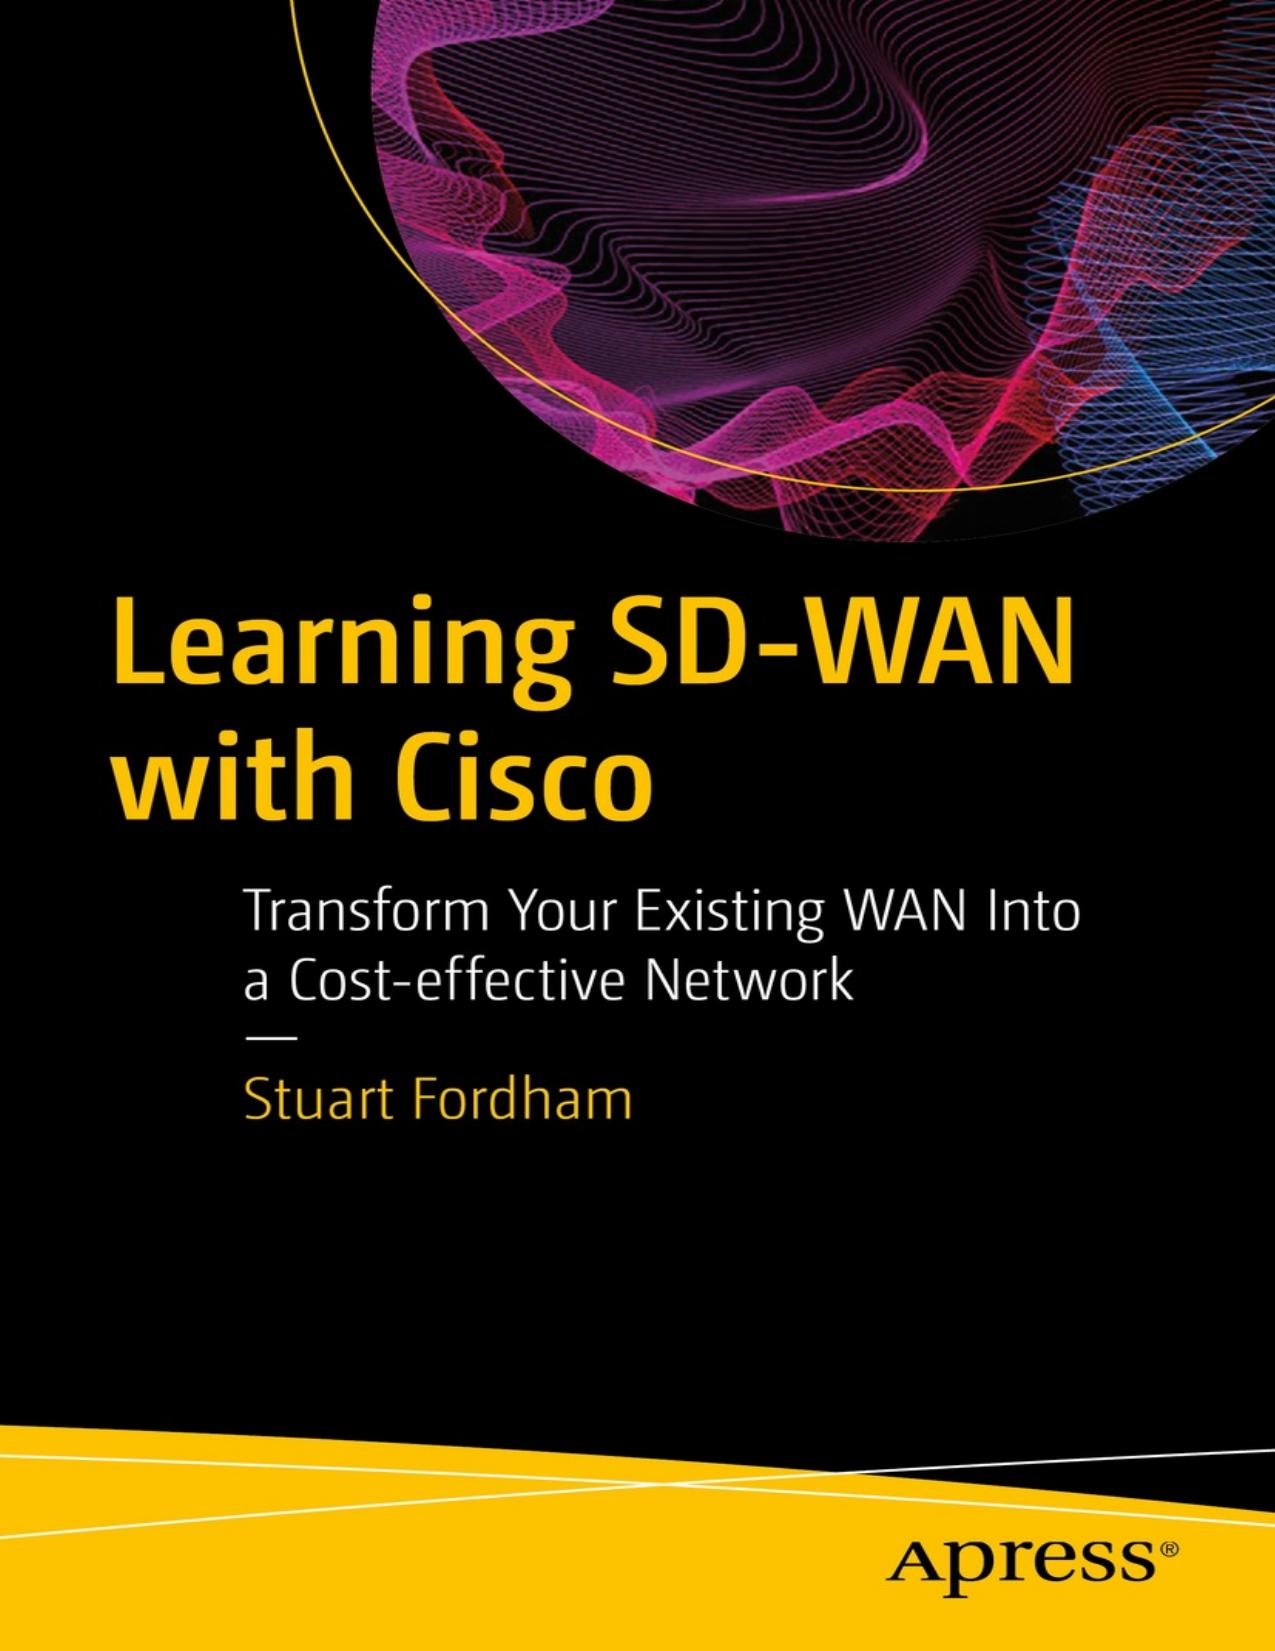 Learning SD-WAN with Cisco - Transform Your Existing WAN Into a Cost-effective Network (2021) by Apress